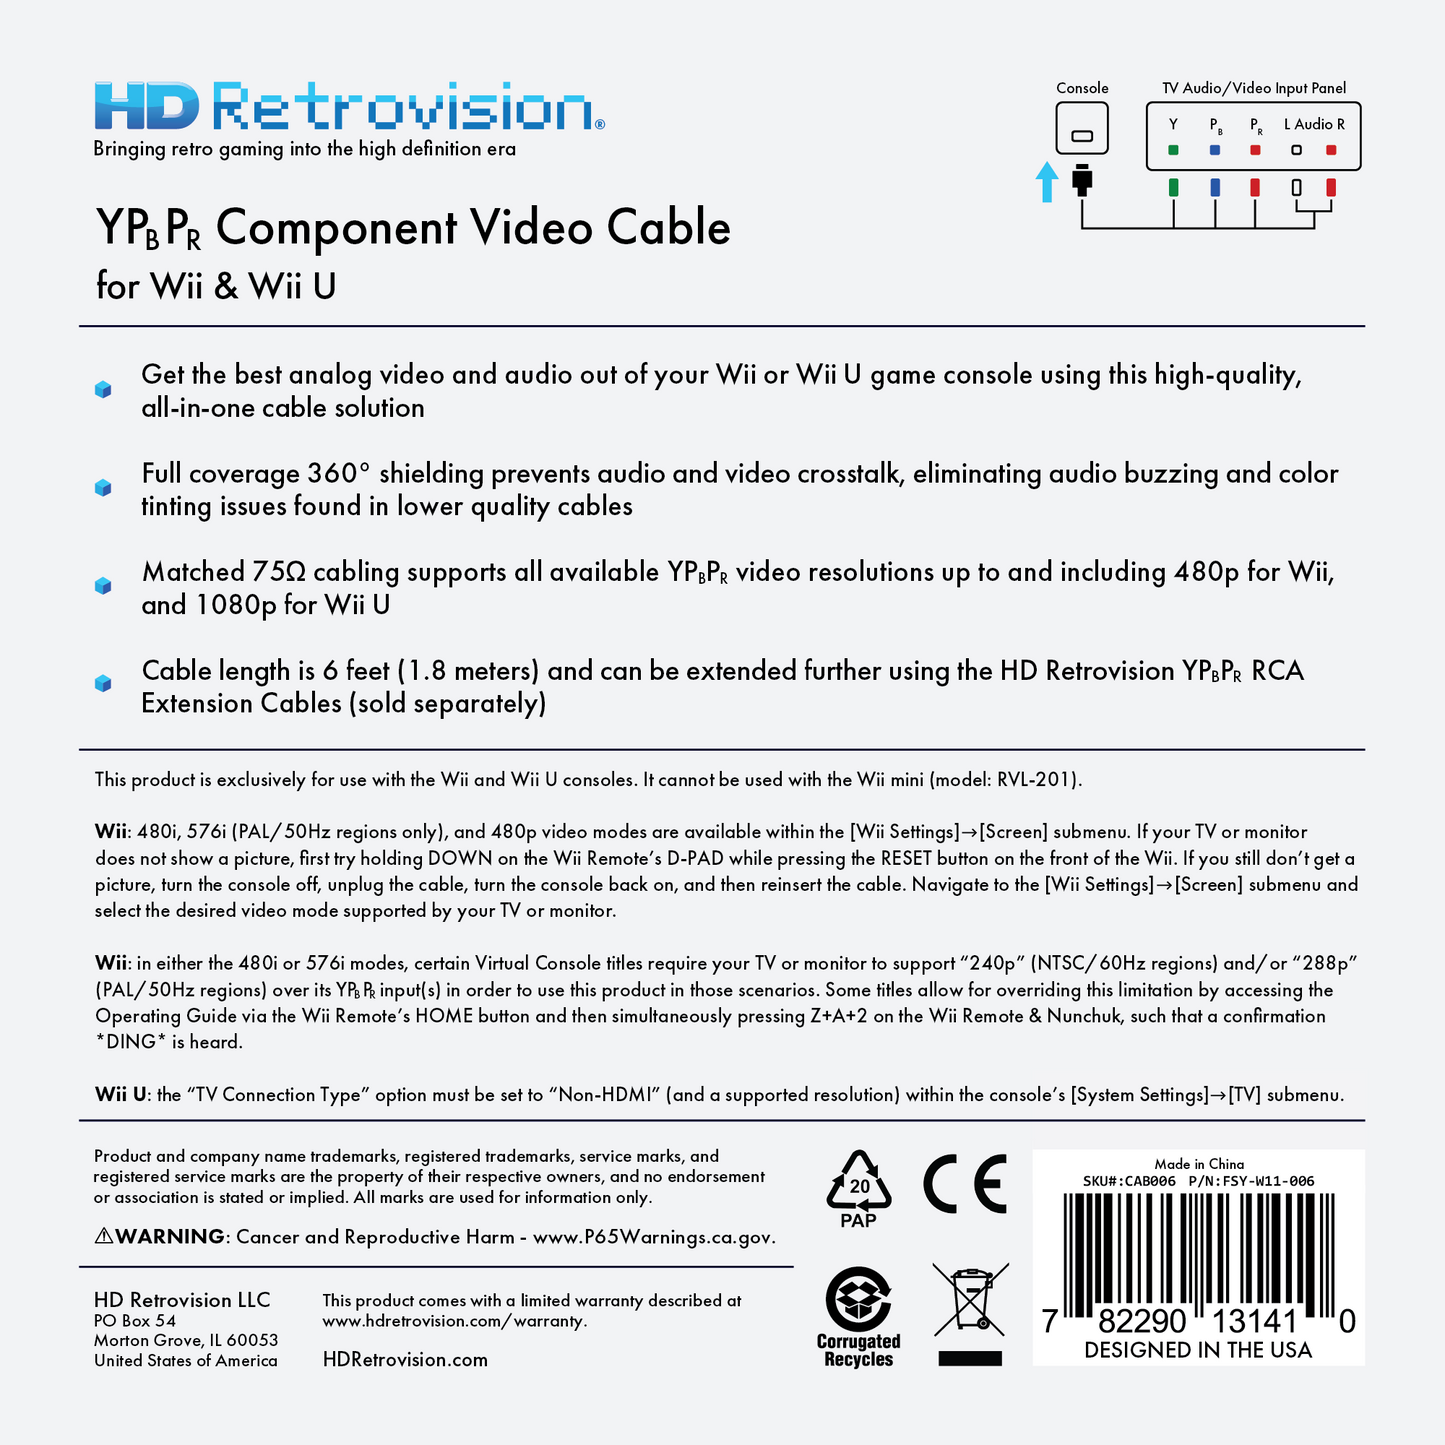 HD RETROVISION Wii YPbPr Component Cable for the Nintendo Wii - CastleMania Games